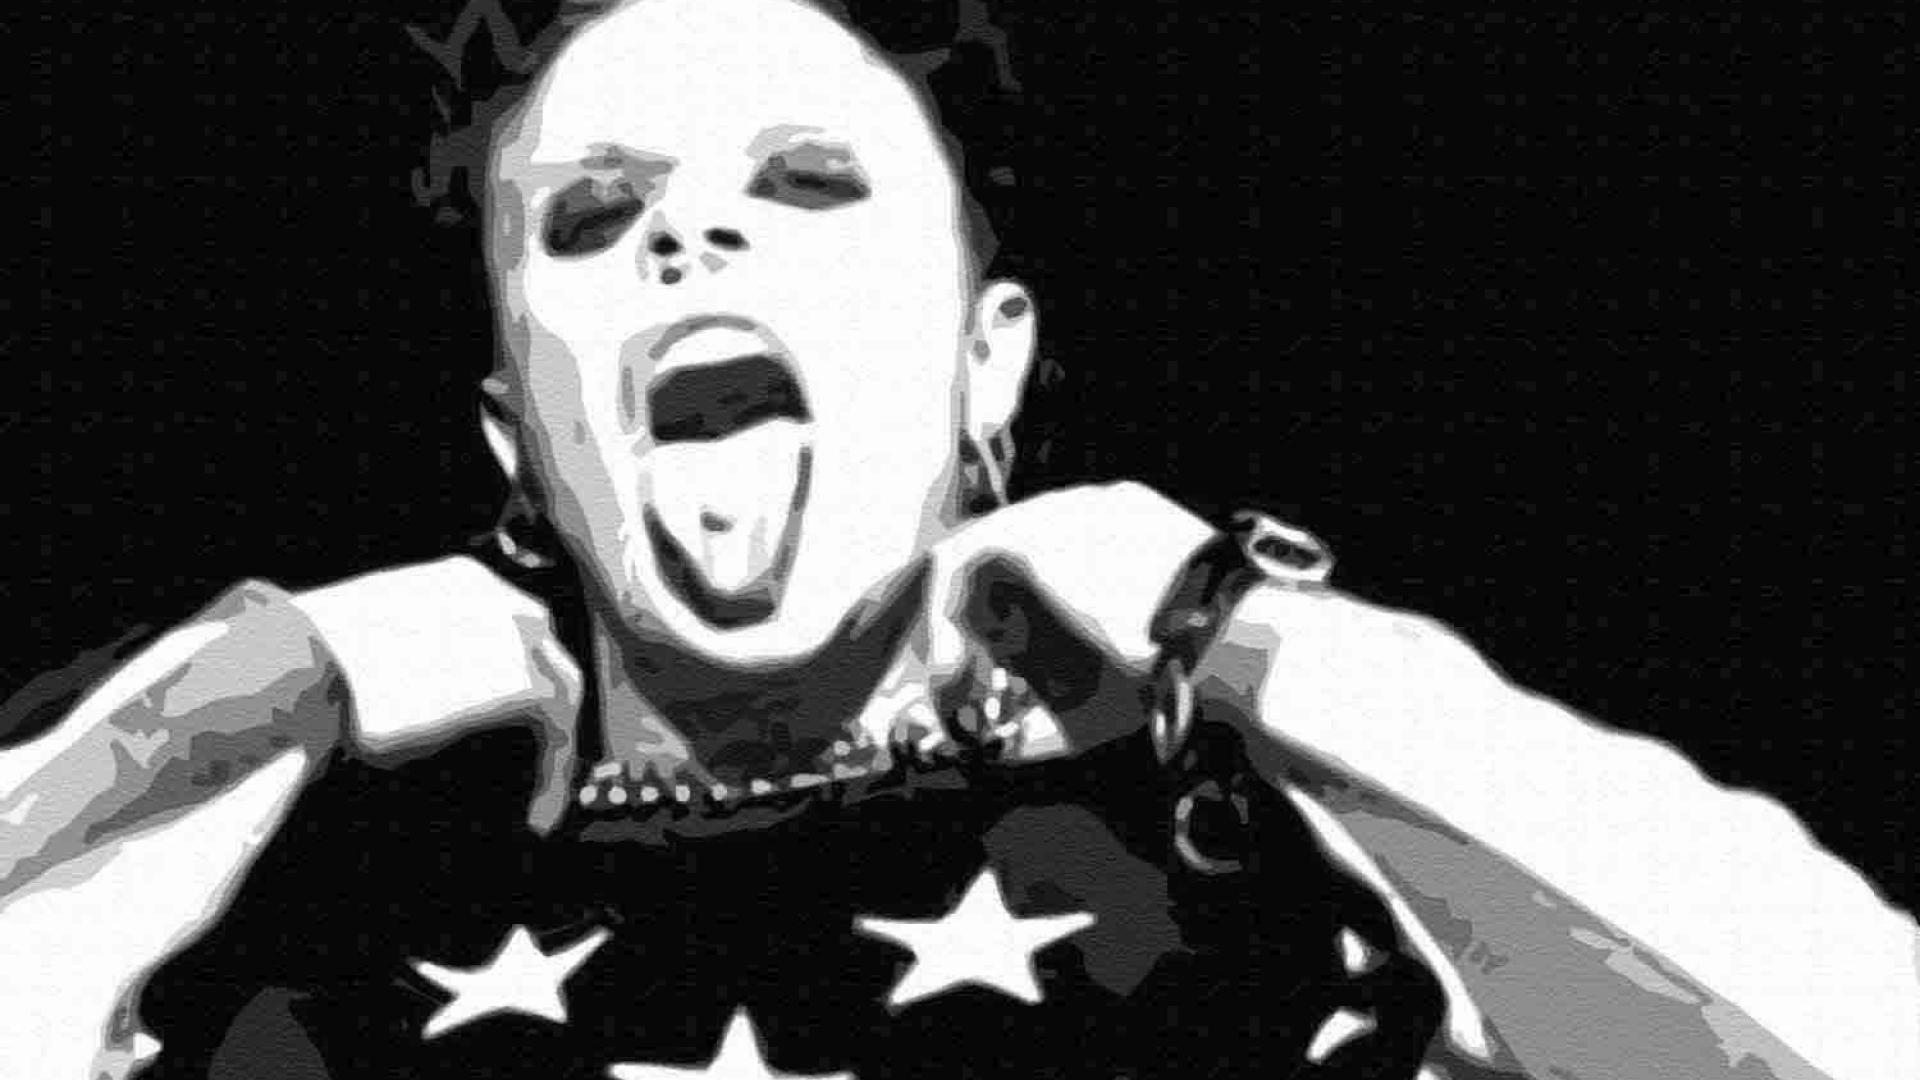 Rock music the prodigy open mouth wallpaper - (#179378) - High ...